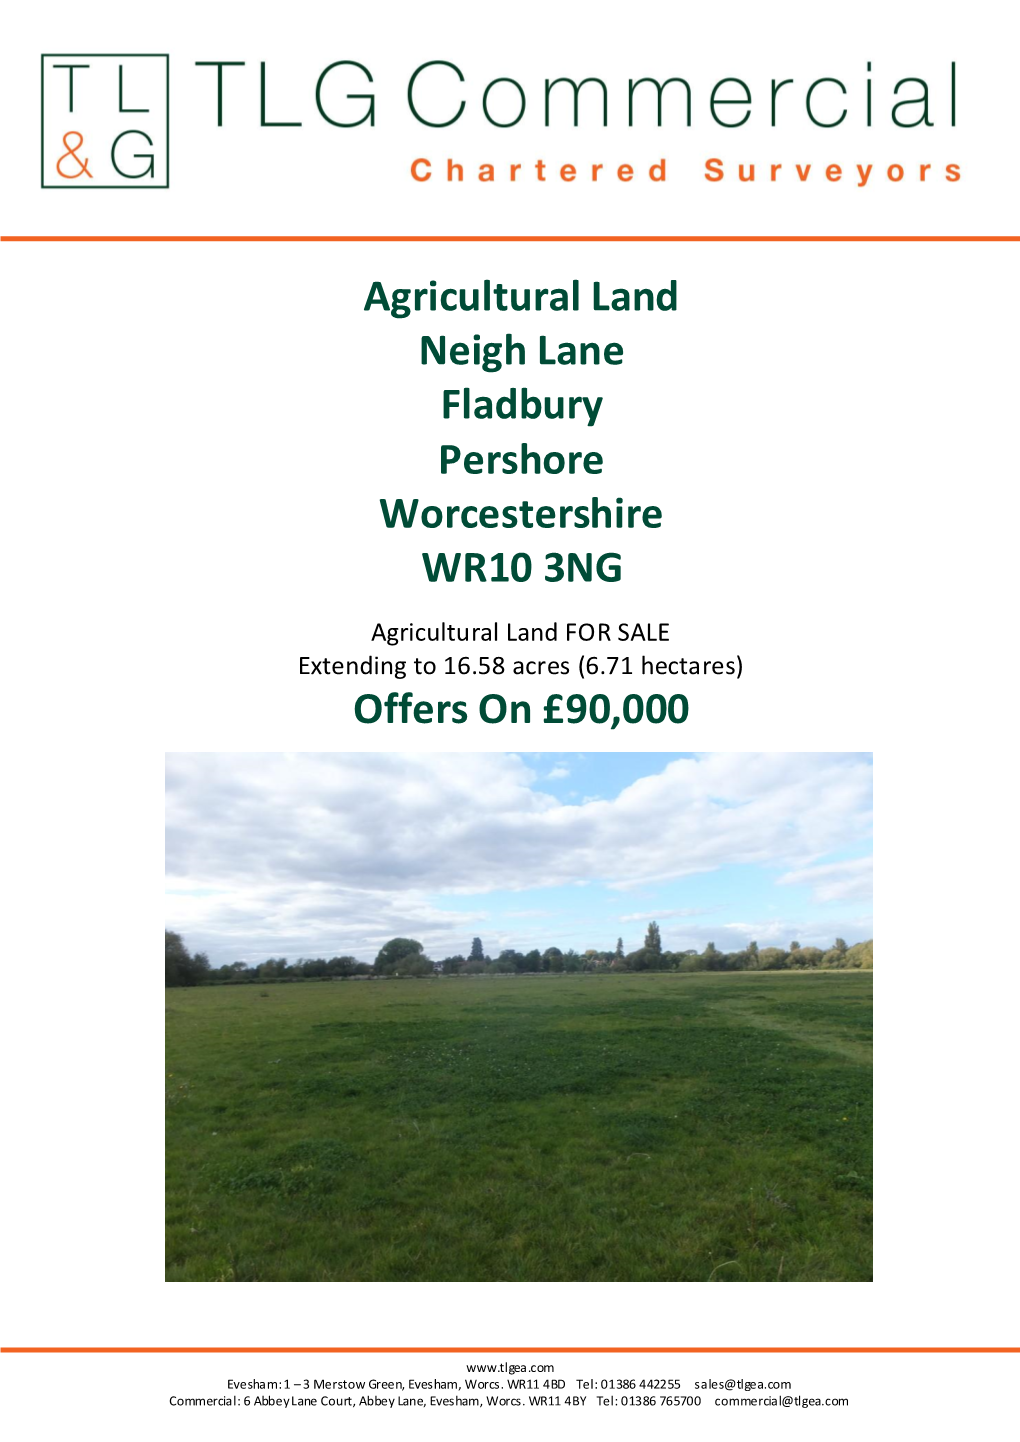 Agricultural Land Neigh Lane Fladbury Pershore Worcestershire WR10 3NG Offers on £90,000